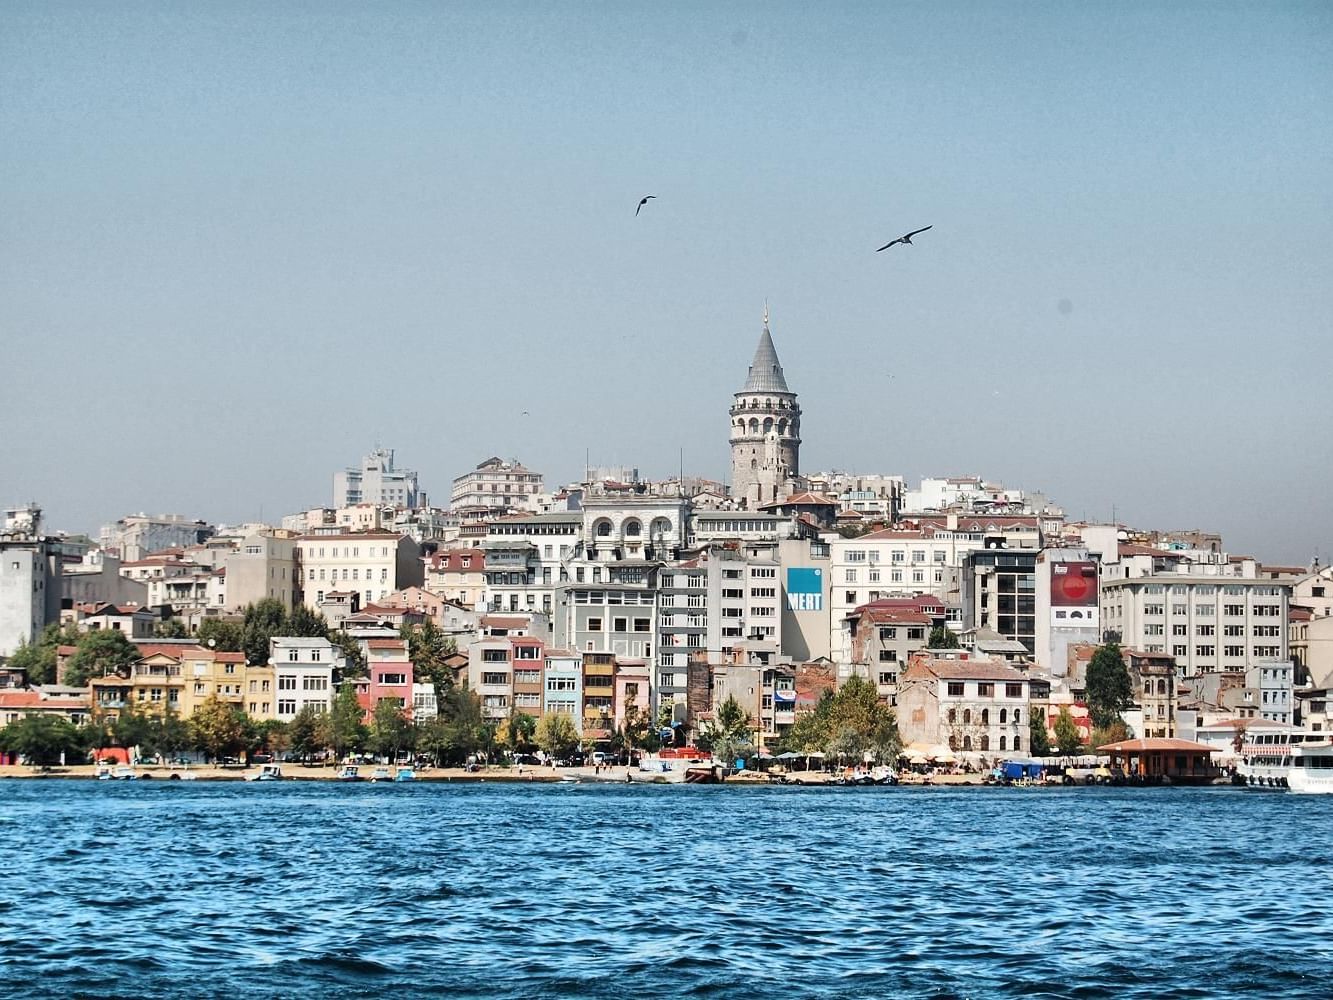 Long shot of the Galata Tower from Eresin Hotels Express